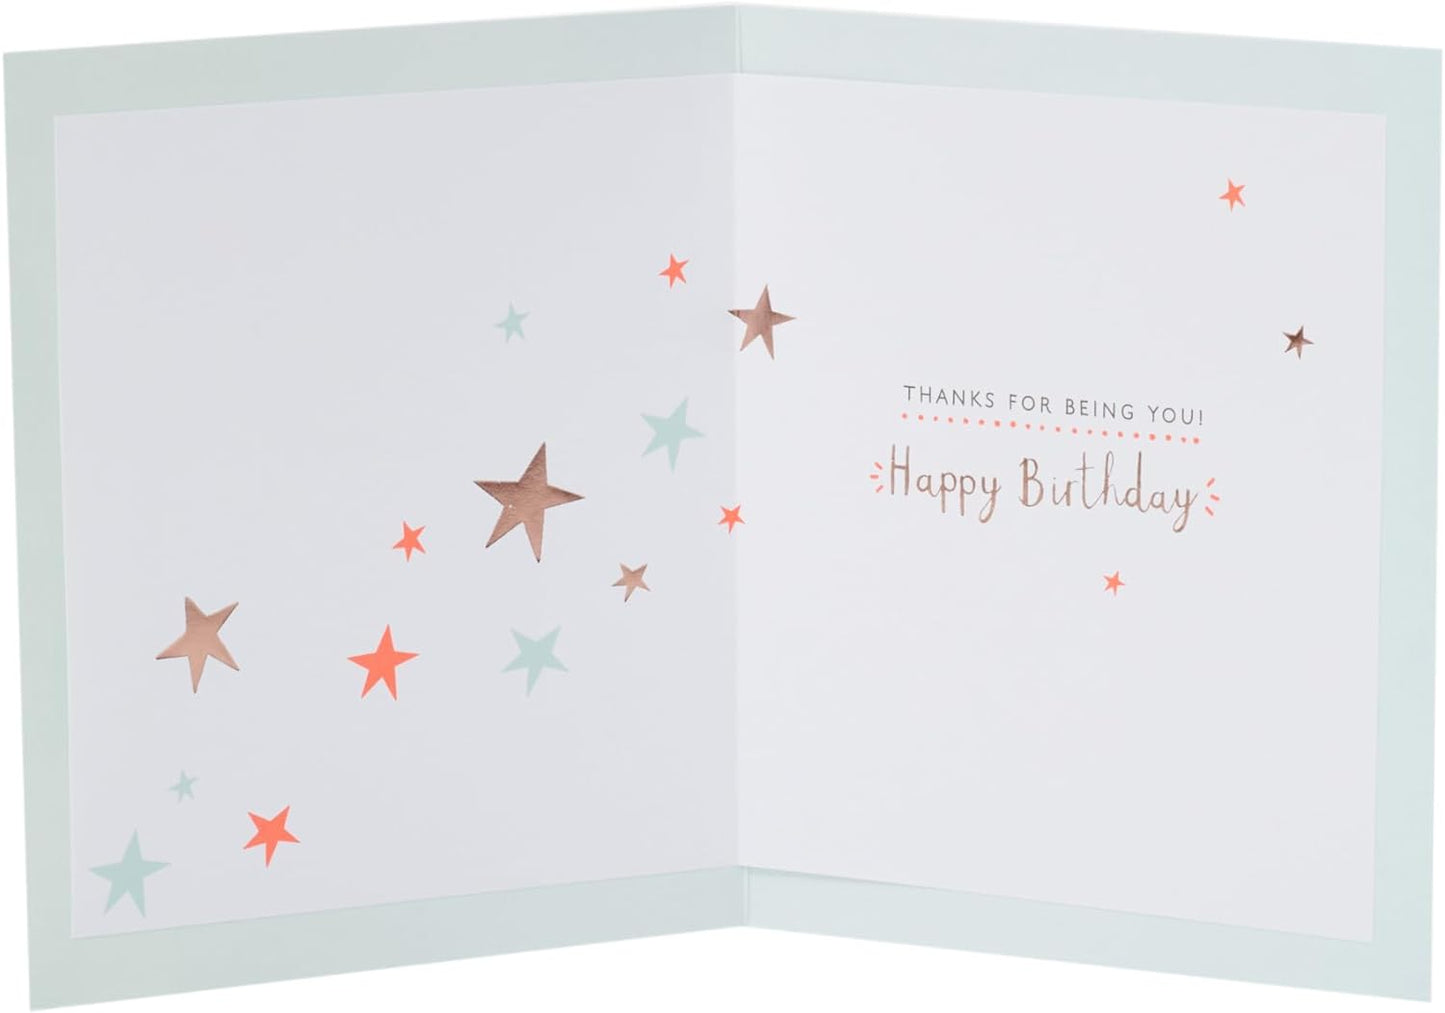 Starry Design Dad from Daughter Birthday Card